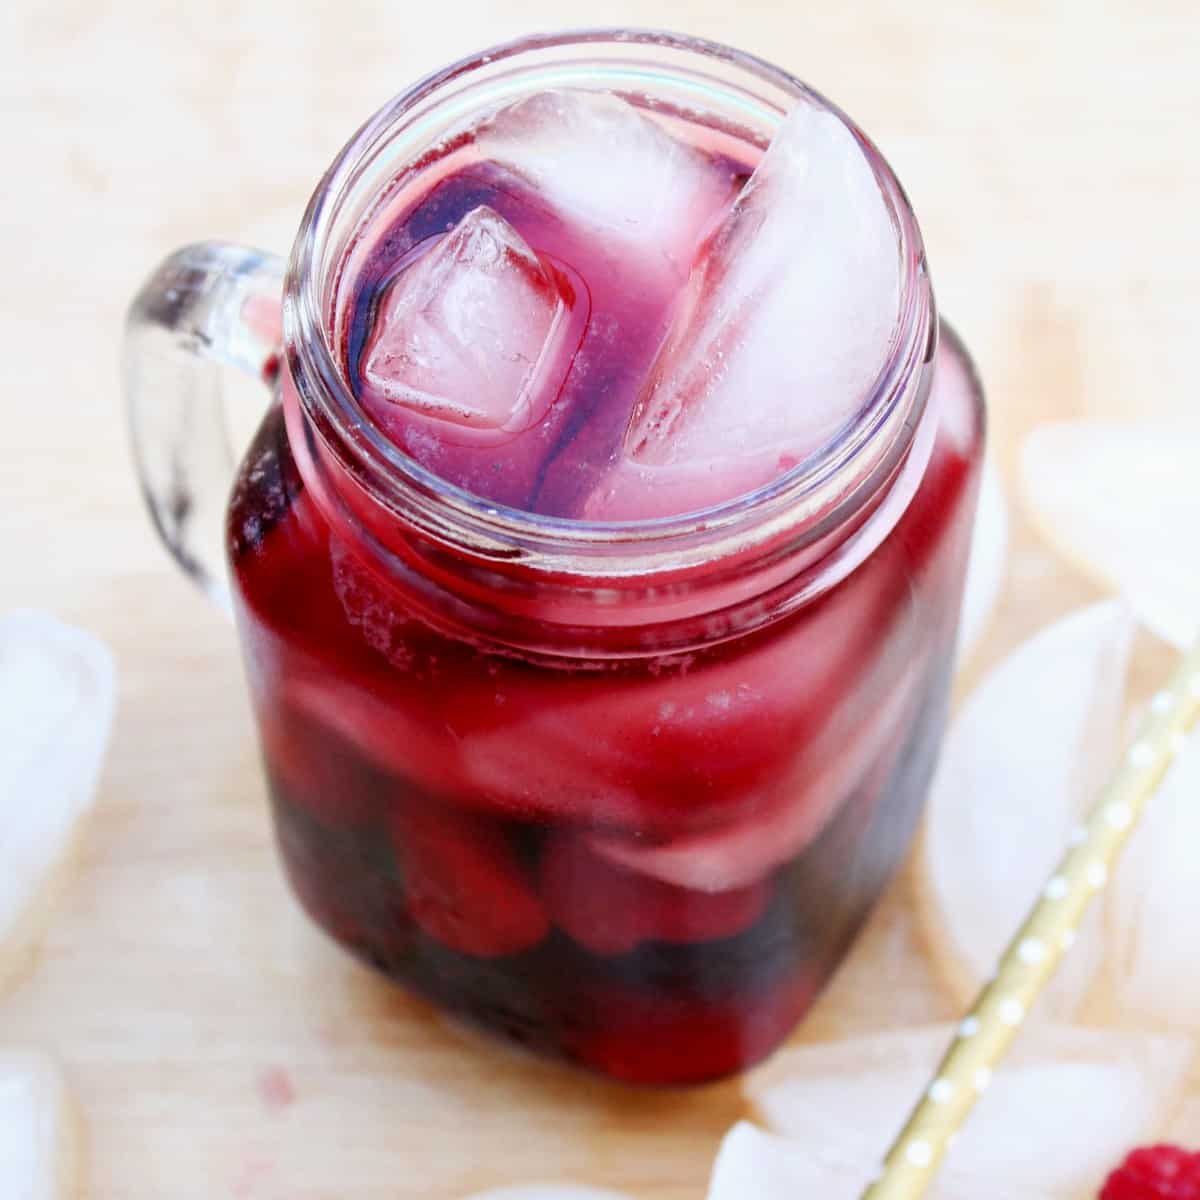 A glass mug with the handle on the left and red wine sangria is filling the glass with alcoholic beverages and berries.